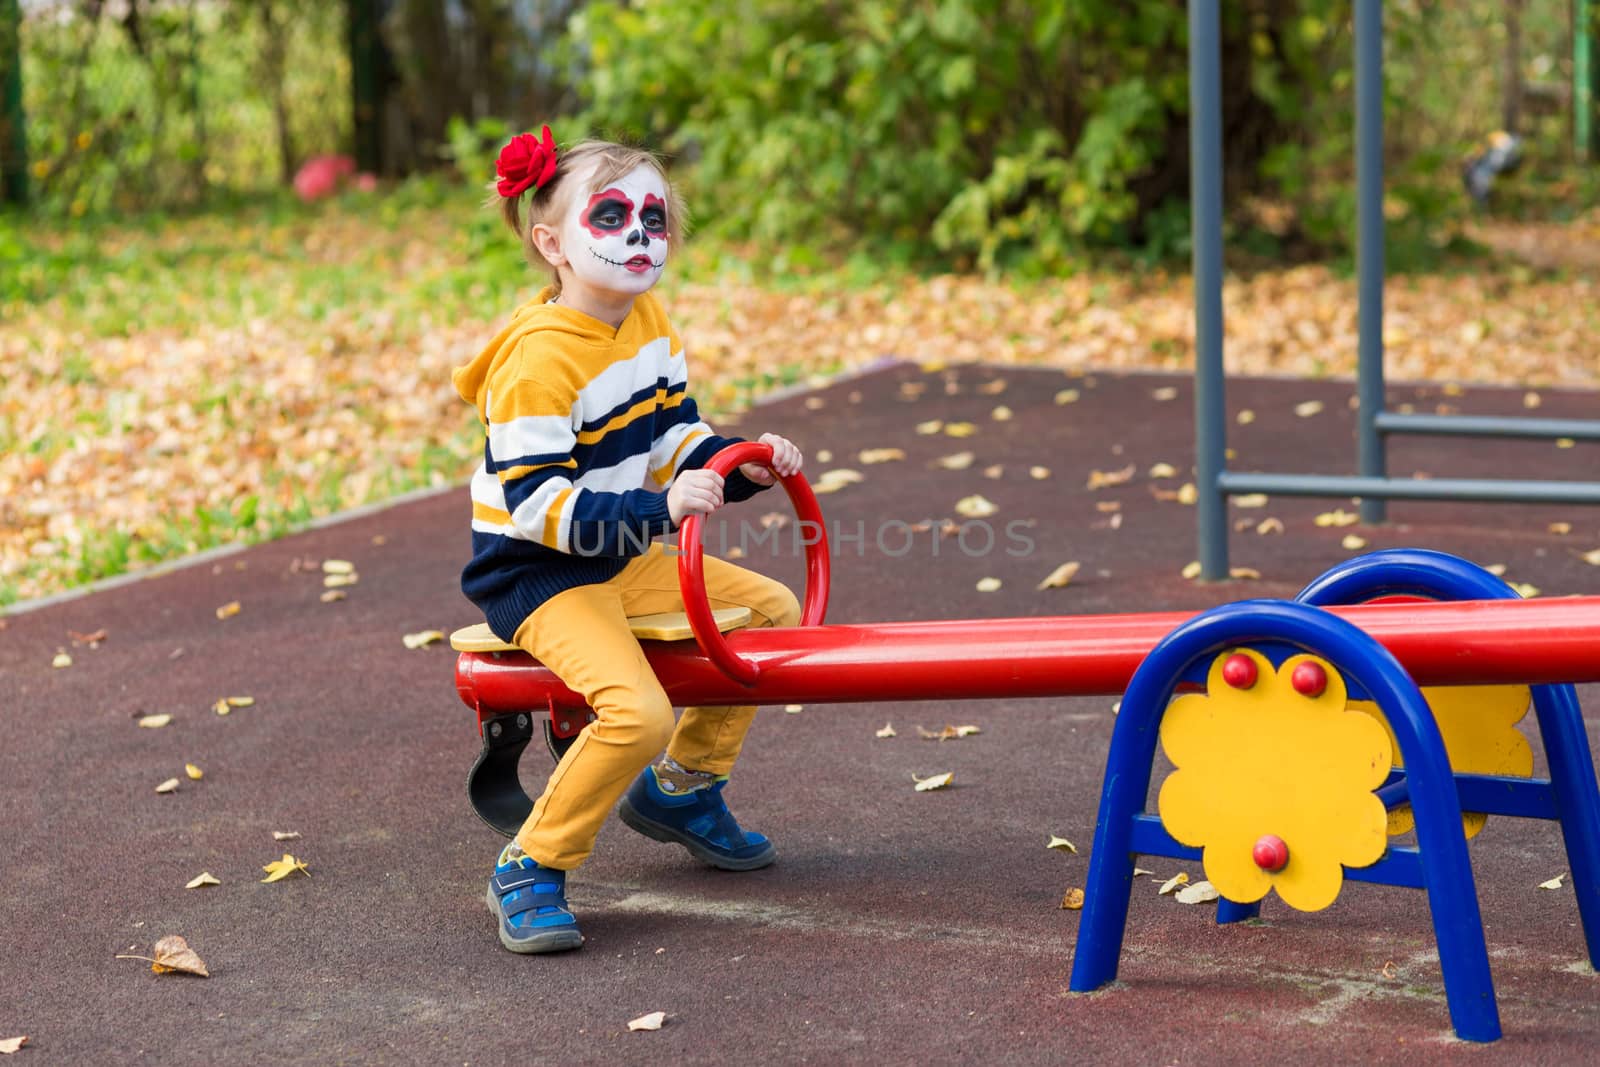 A little girl with Painted Face, smiling at the playground on Day of the Dead.. by galinasharapova